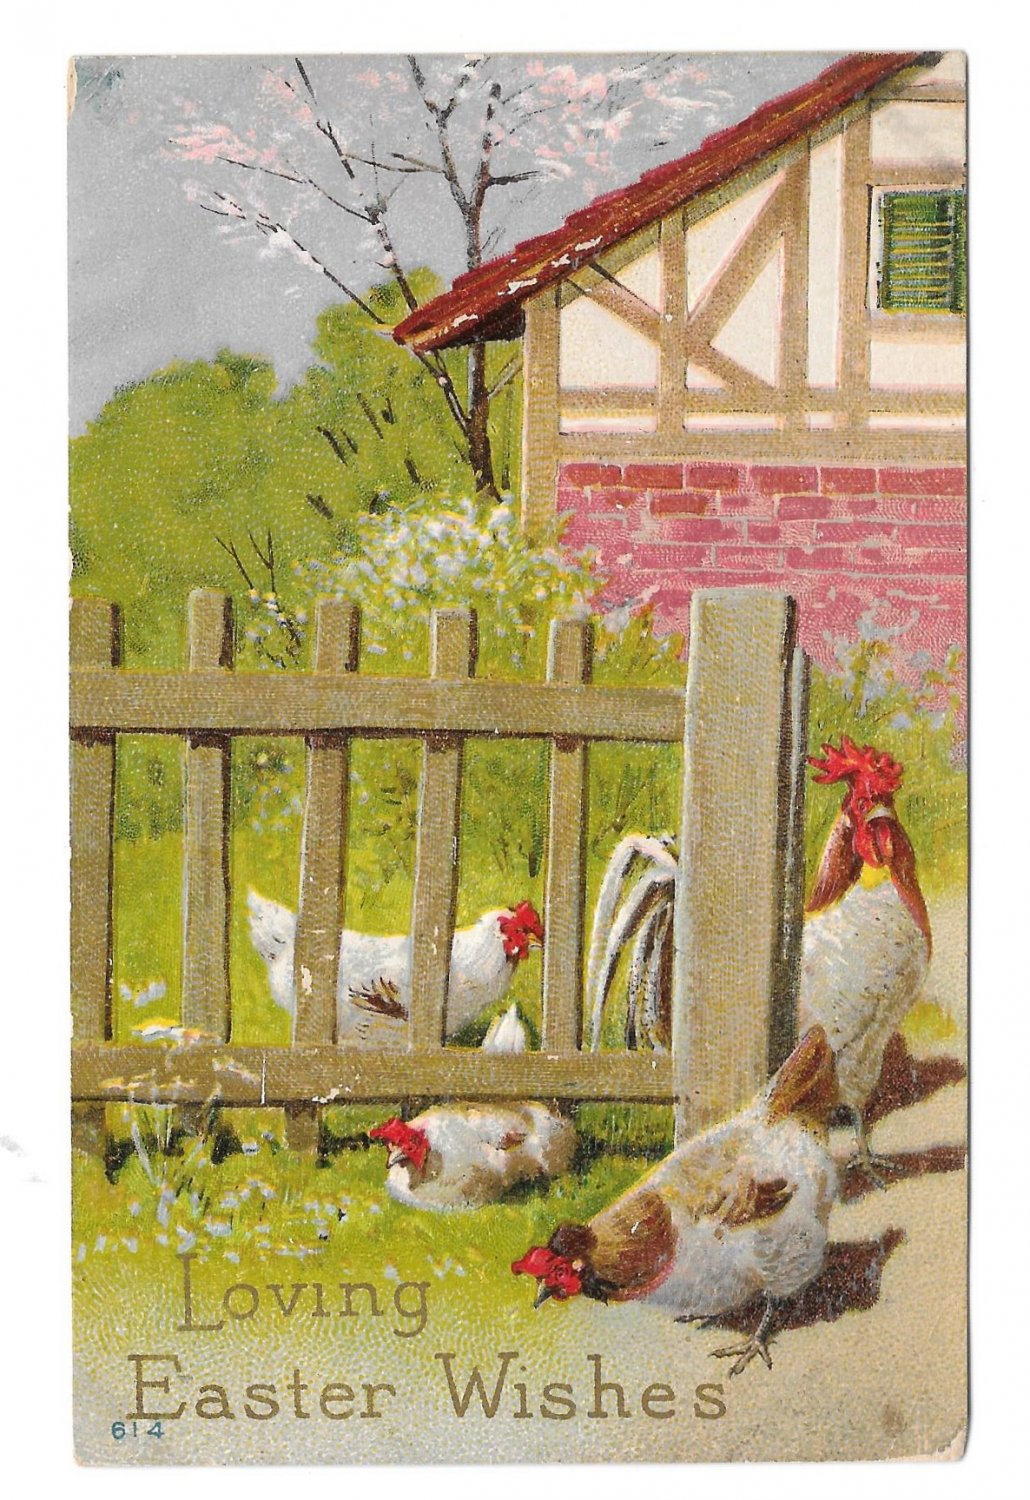 Easter Wishes Chickens Rooster Fenced Yard Embossed Postcard Vintage Posted 1911